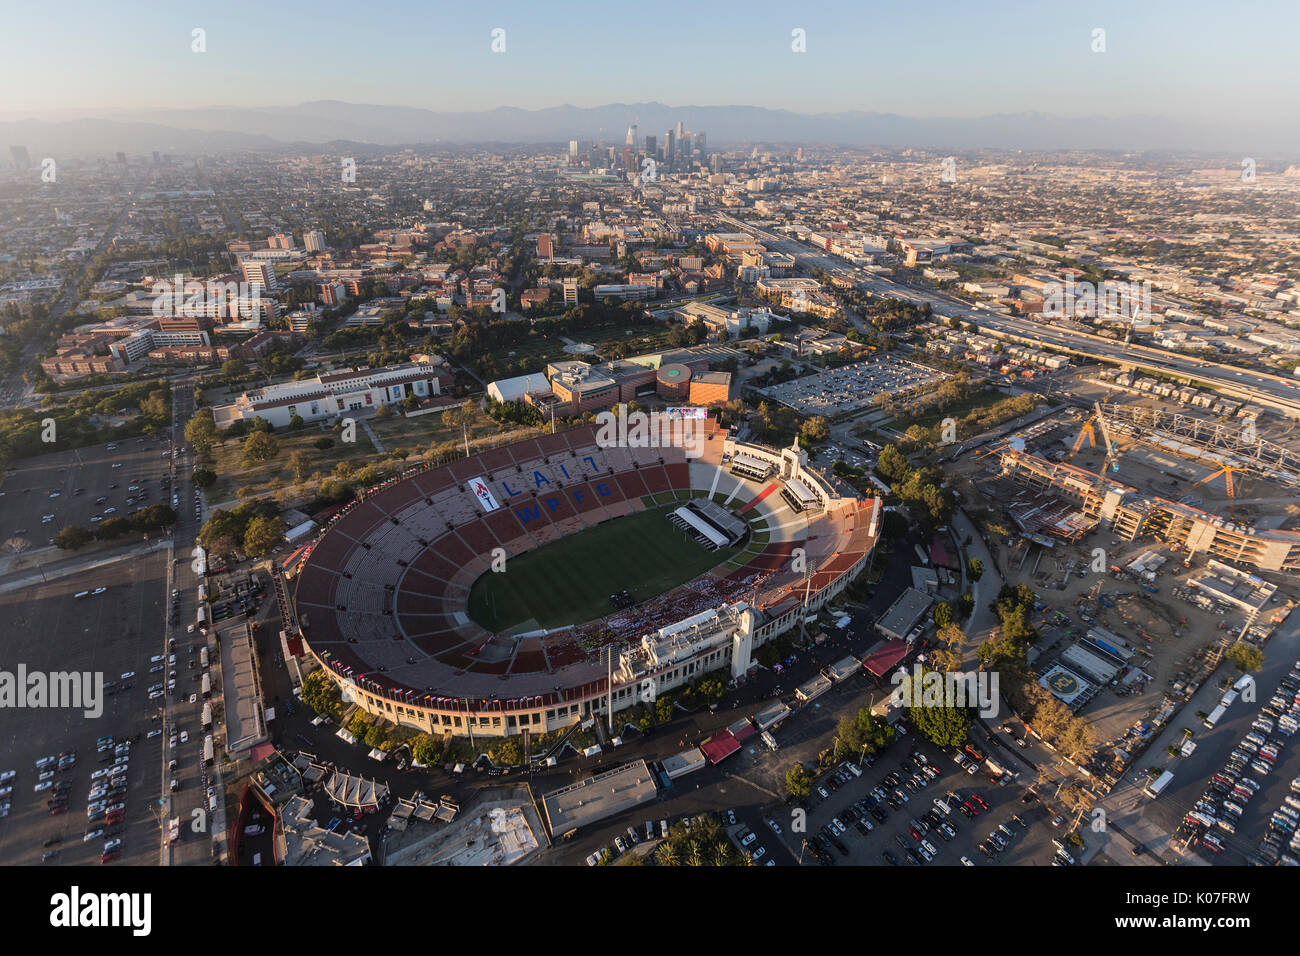 Los Angeles, California, USA - August 7, 2017:  Aerial view of the historic LA Memorial Coliseum stadium, USC and downtown. Stock Photo